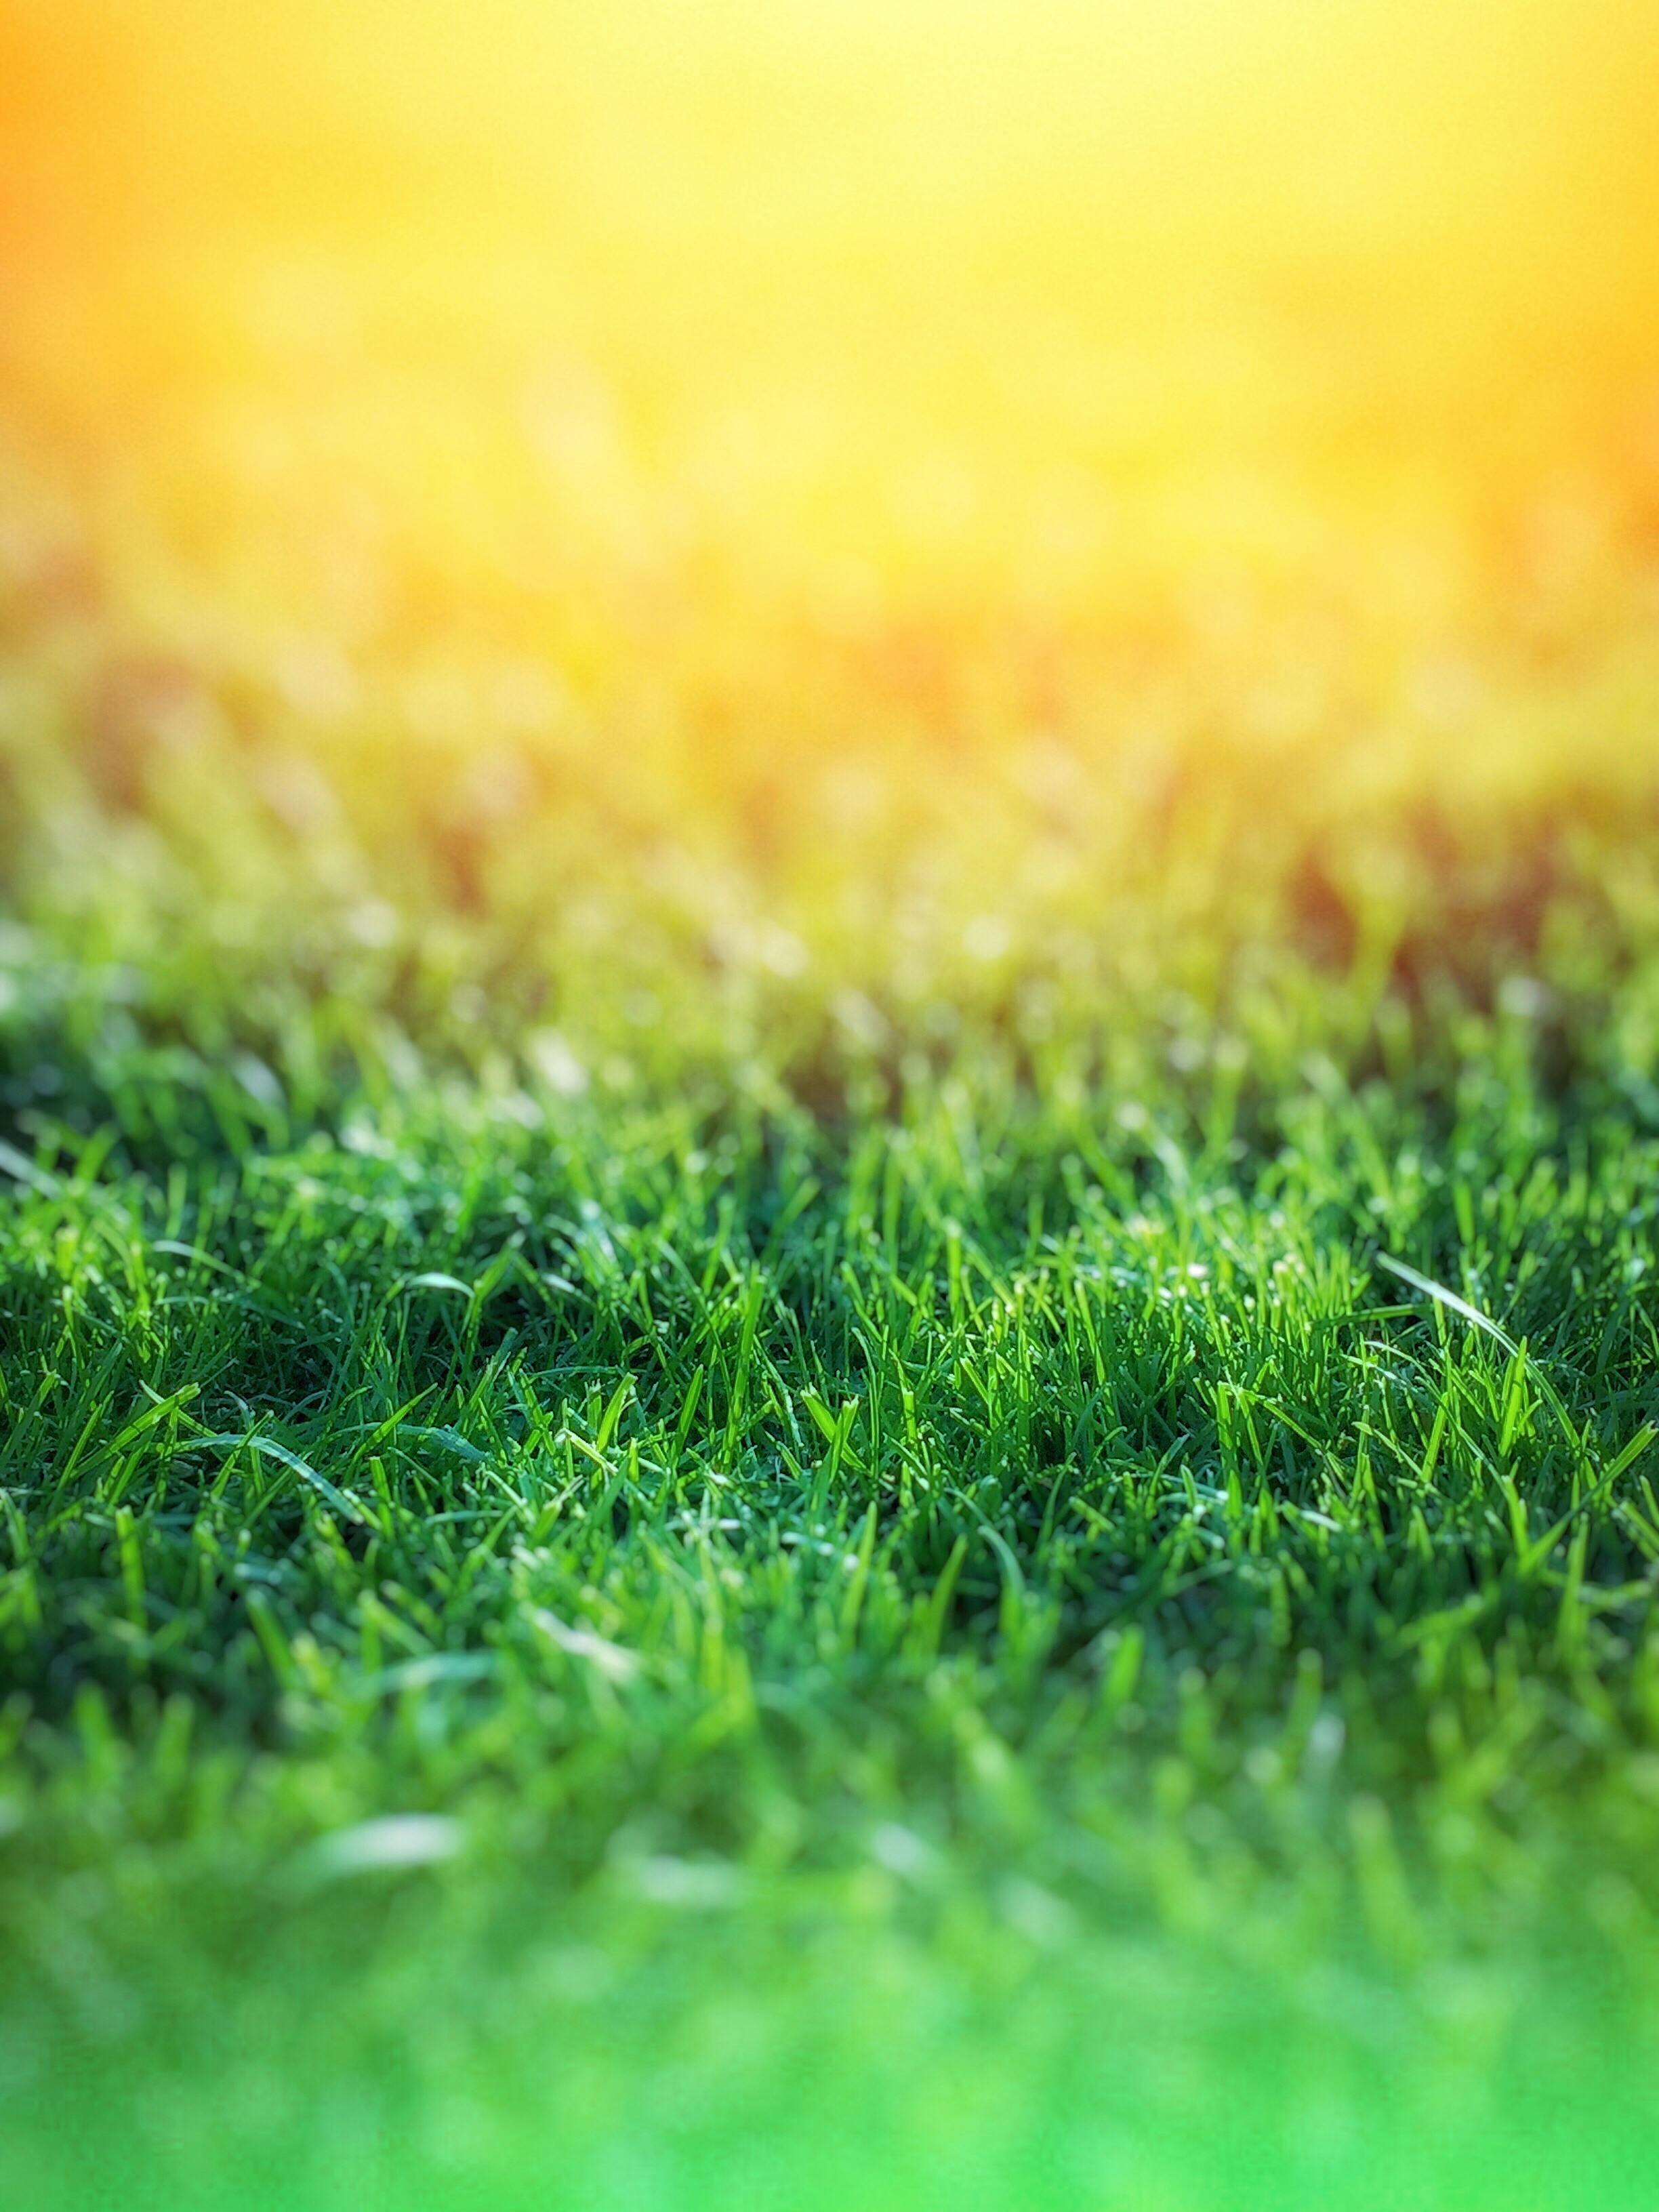 Green Grass over Yellow Background · Free Stock Photo